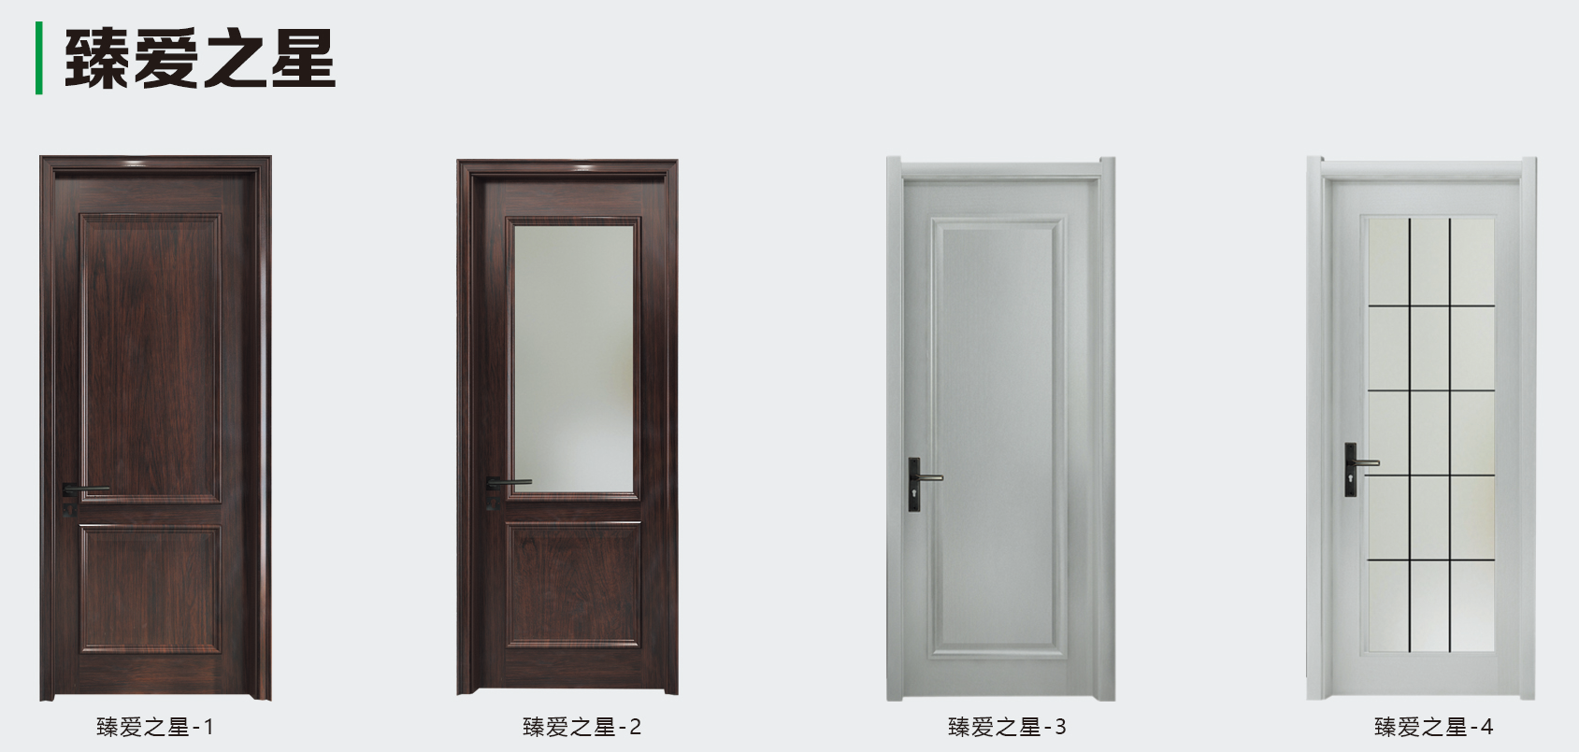 Chinese Traditional WPC Door